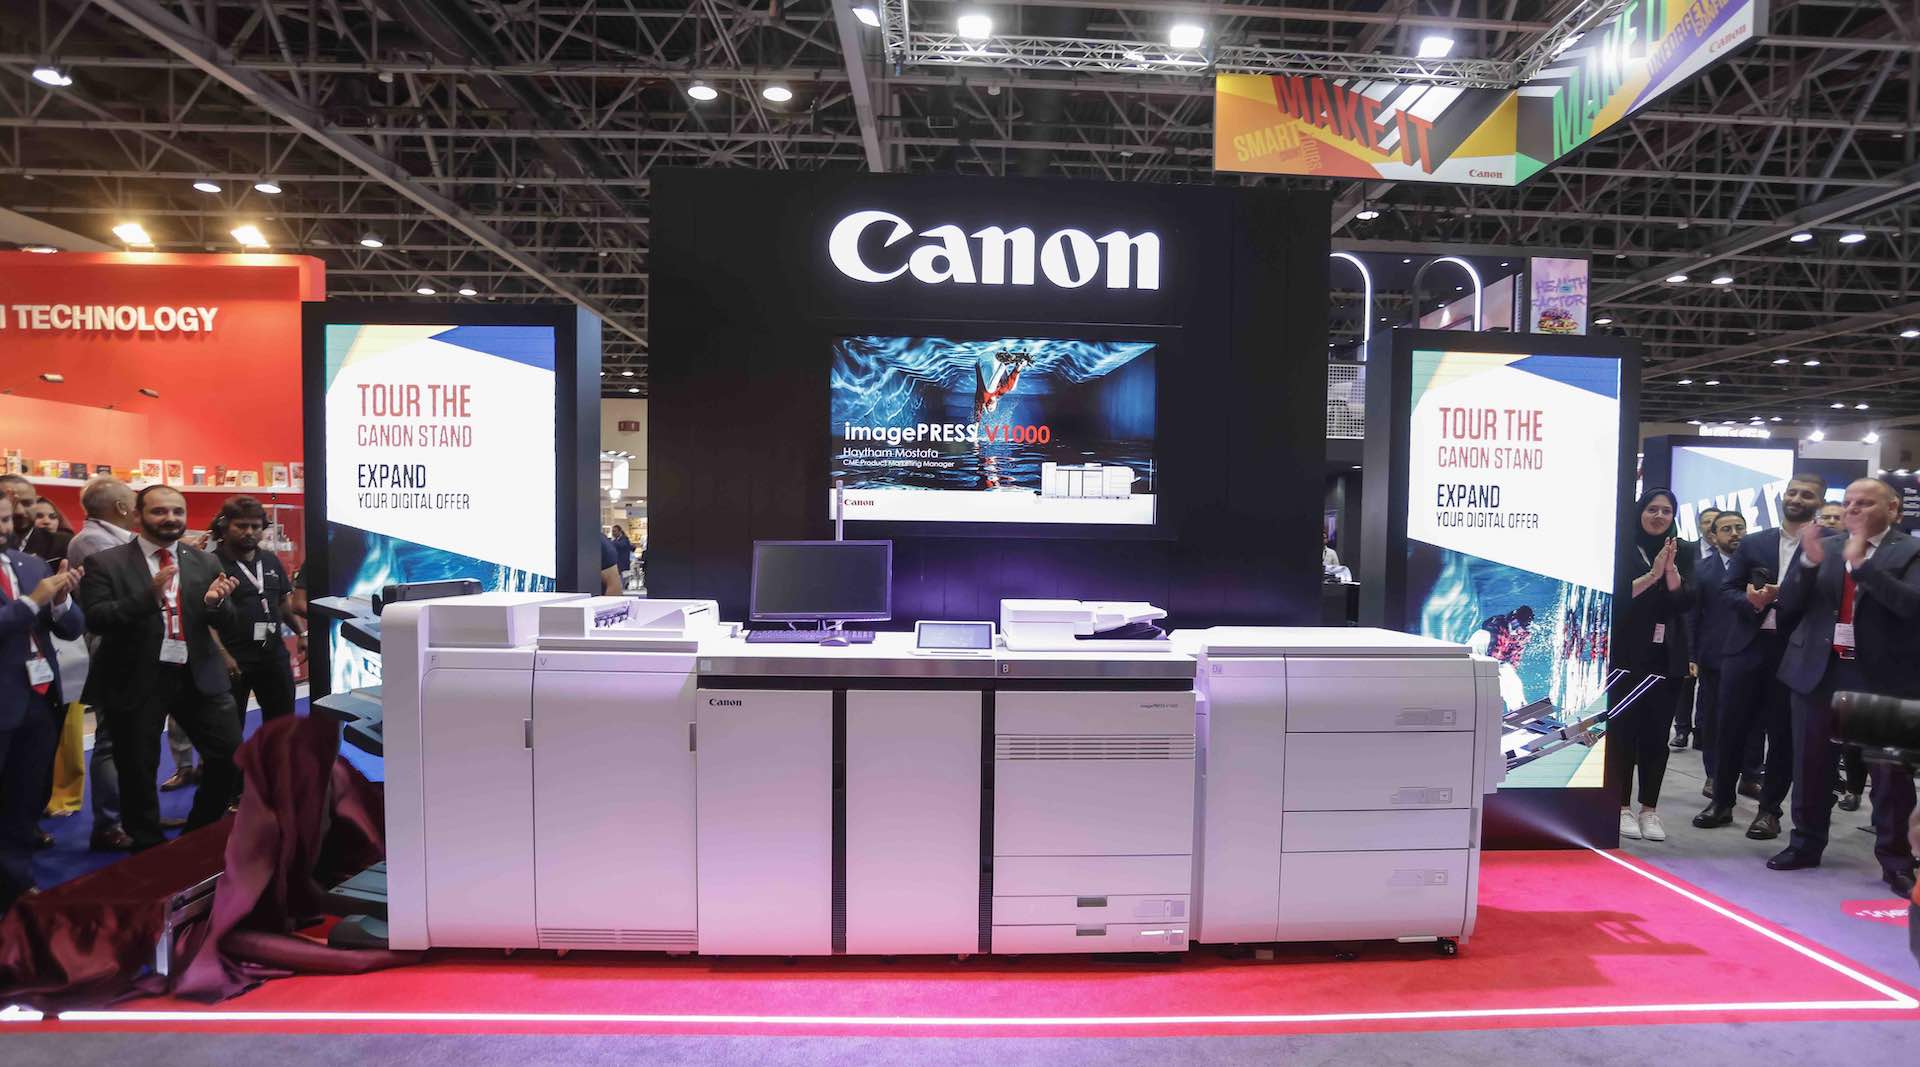 Canon launches ImagePress V1000 at GPP with $2.5 million in orders